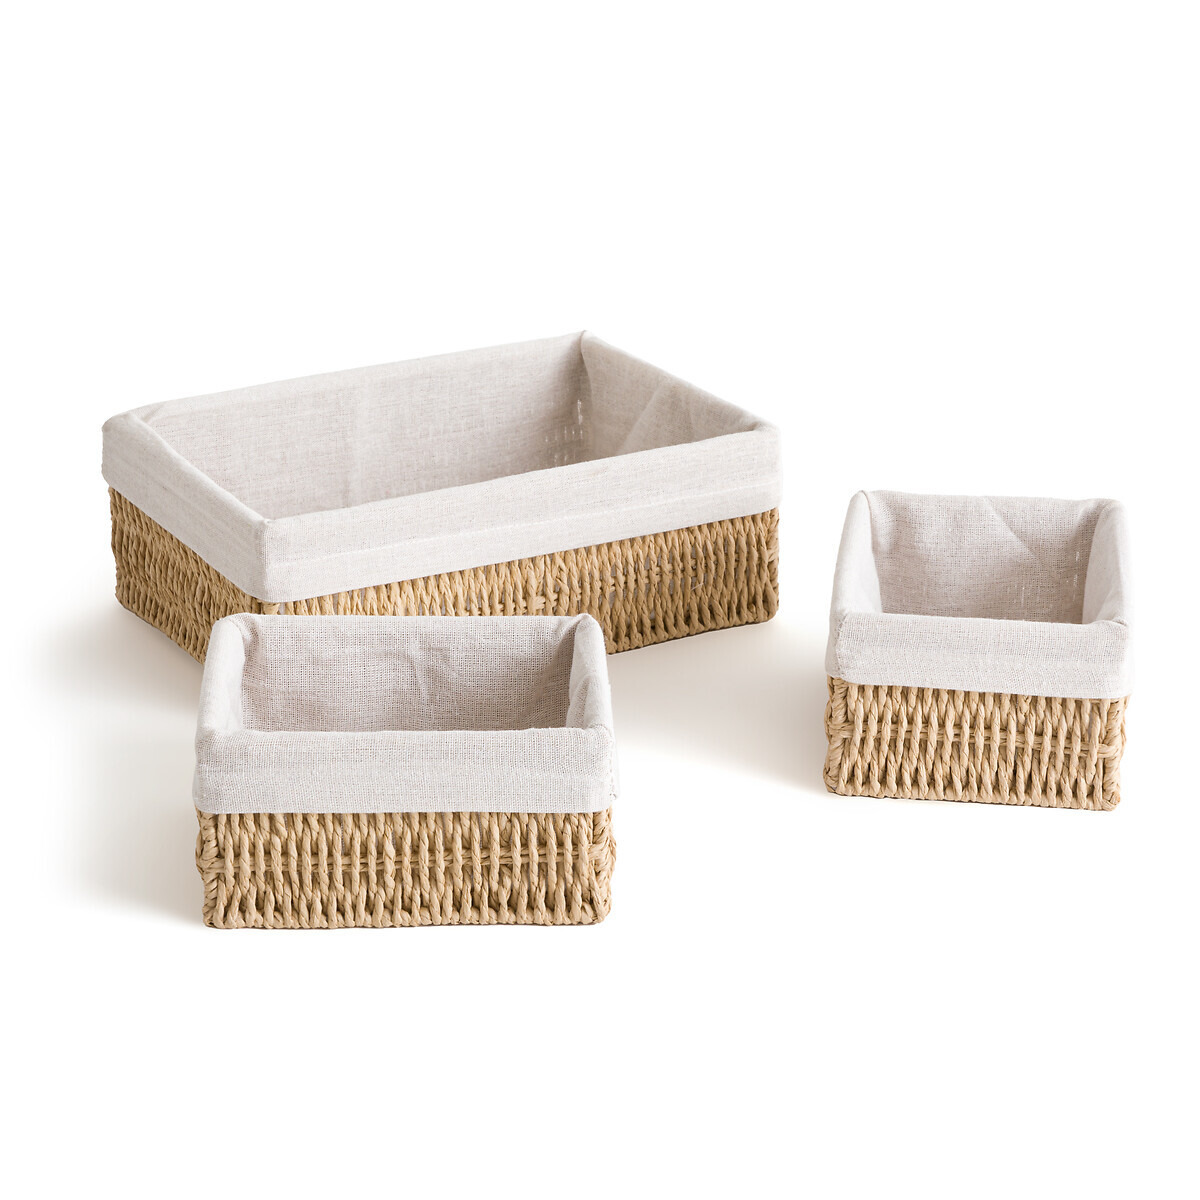 Set of 3 Papeli Paper Rope Baskets - image 1